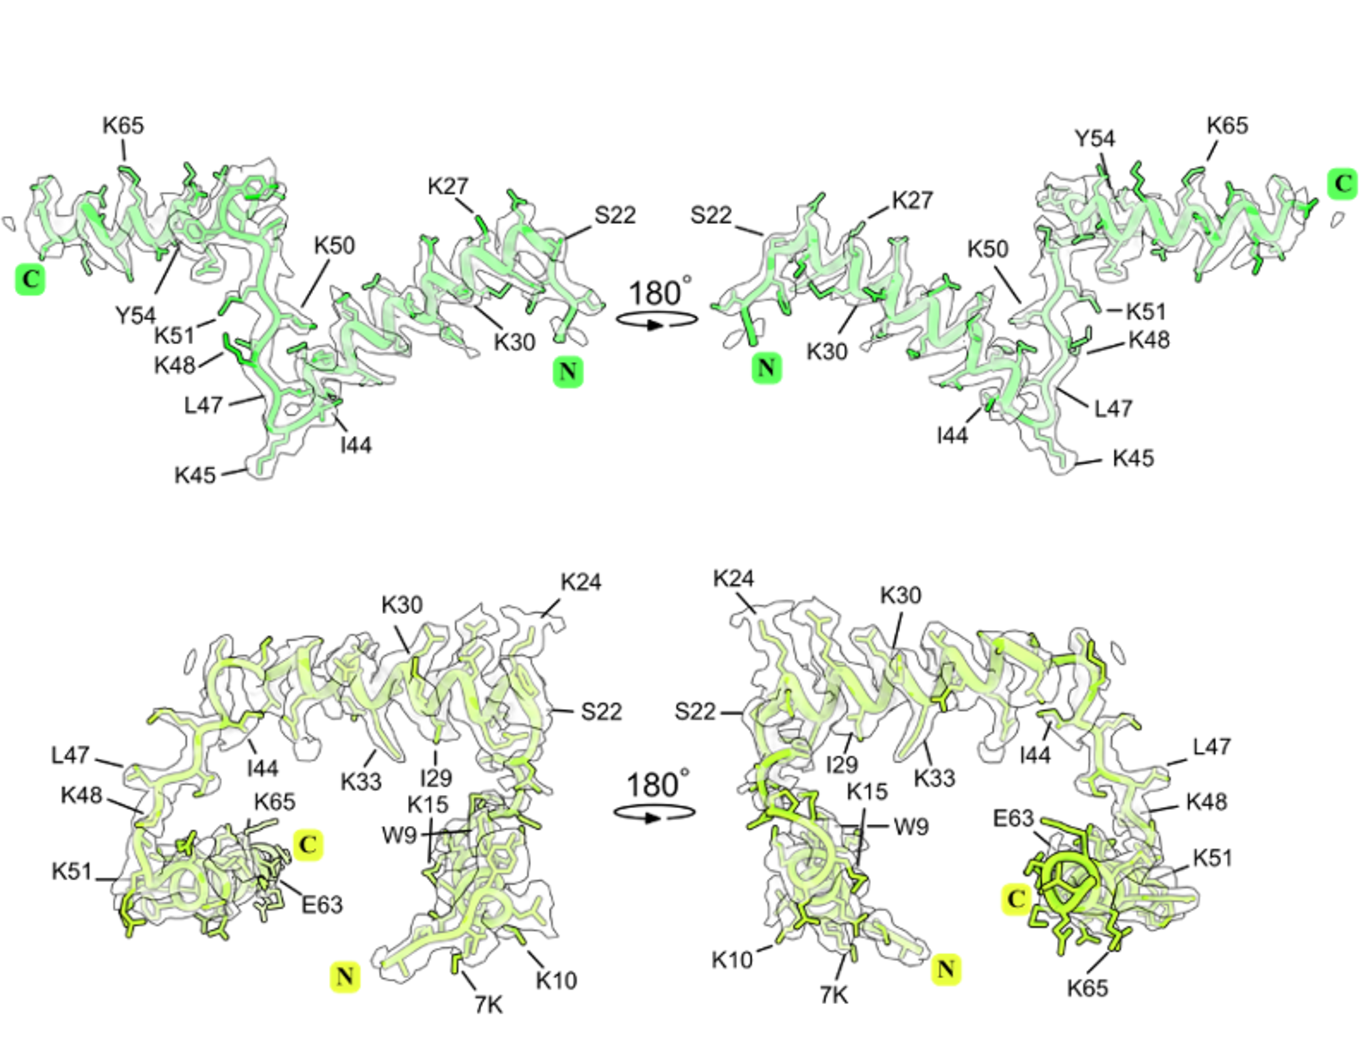 The cryo-EM maps and atomic models showing the structure of ribosomal protein msL1 in the ribosome from microsporidian parasites V. necatrix (first row), and protein msL2 in the ribosome from microsporidian parasites E. cuniculi (second row). Image: Leon Schierholz